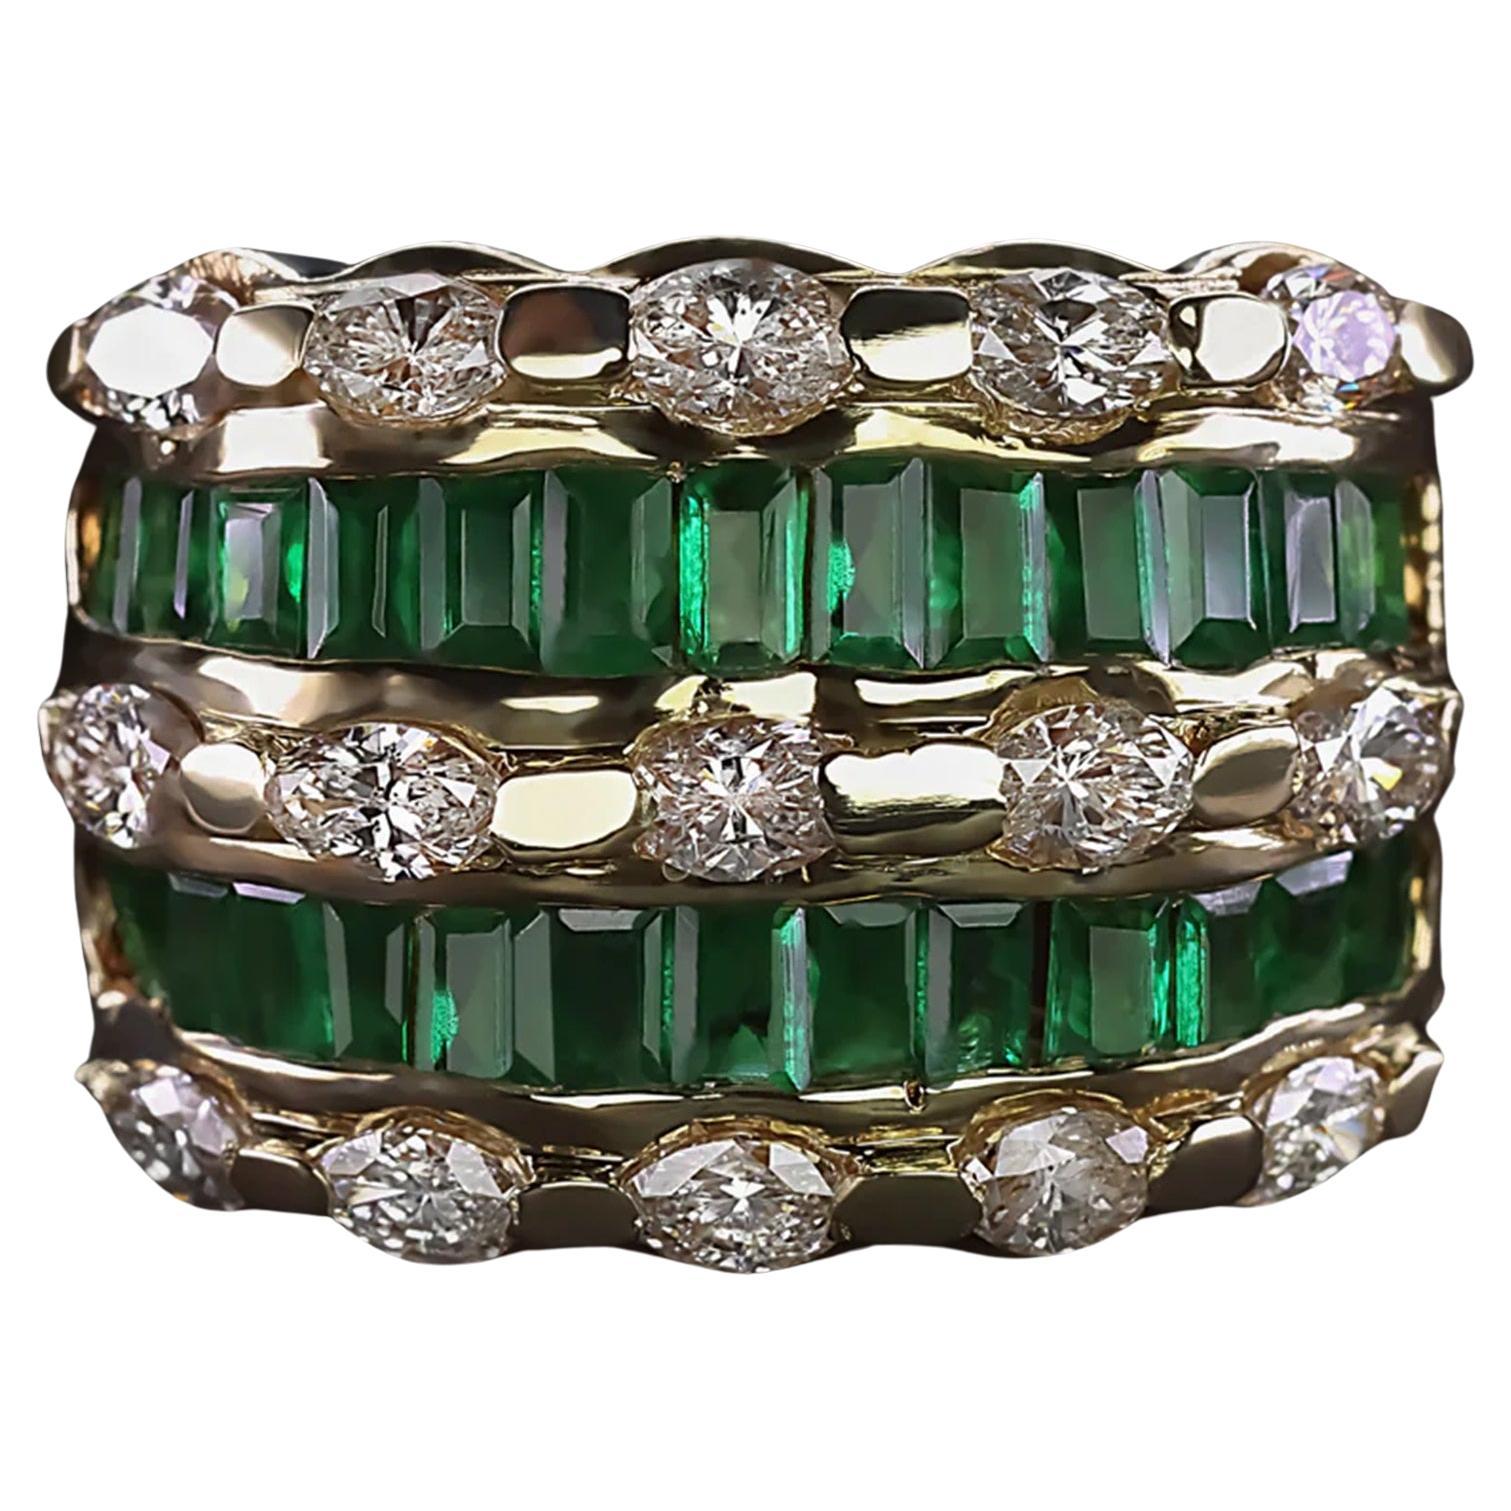 Indulge in the opulence of this striking wide band, beautifully crafted with a combination of sparkling marquise cut diamonds and vivid green emeralds. This luxurious ring is a true statement piece, offering both captivating color and radiant